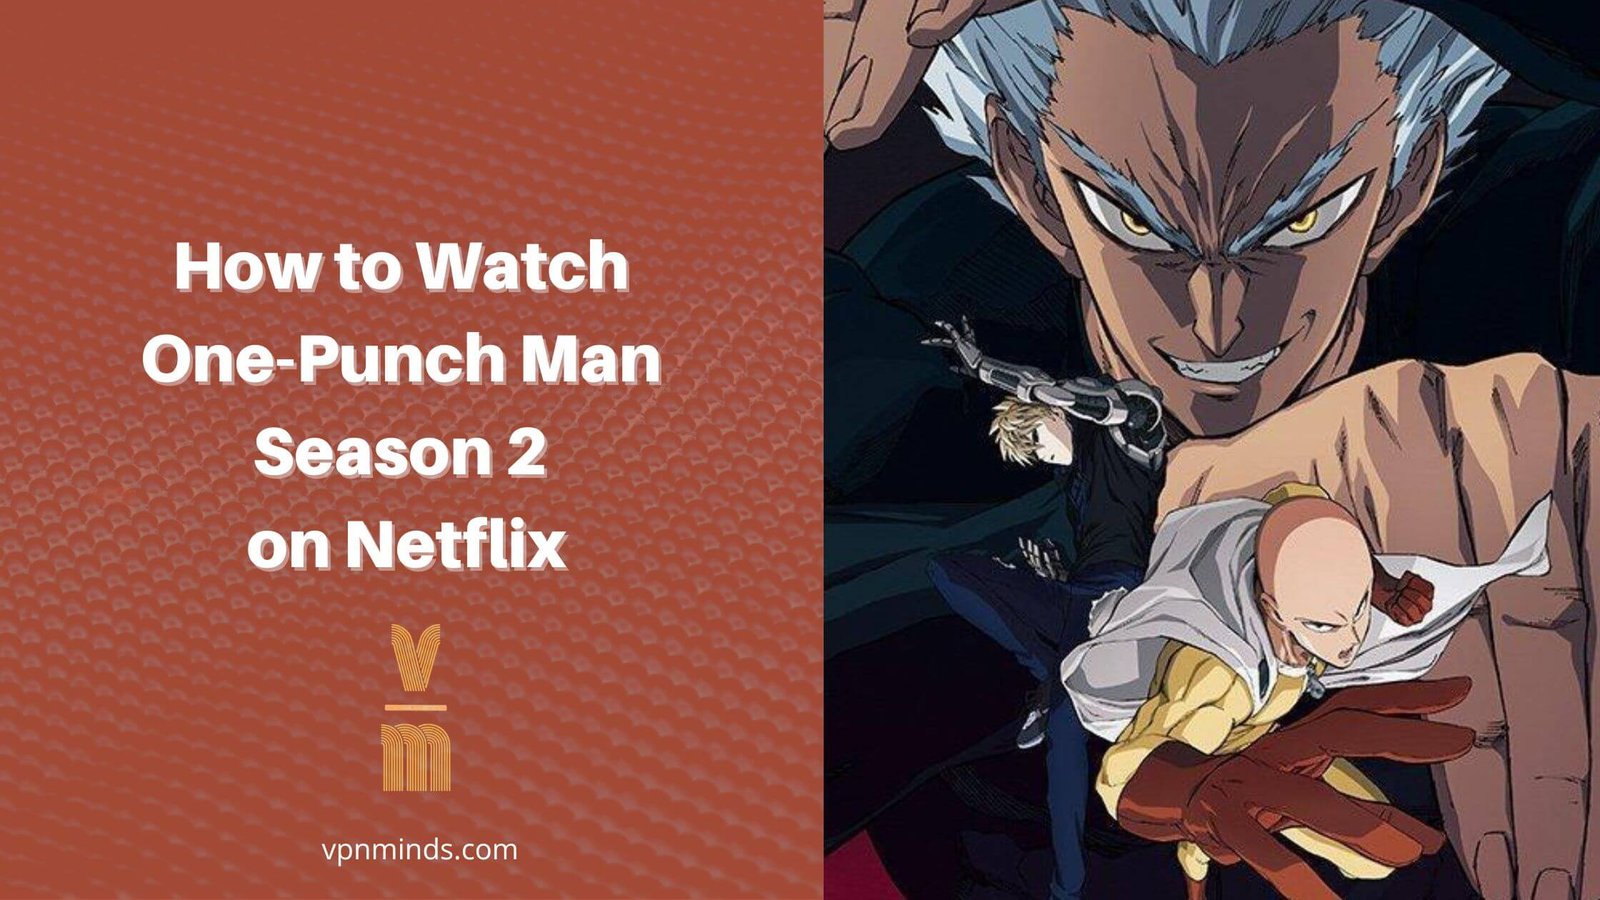 How to watch One Punch Man Season 2 on Netflix